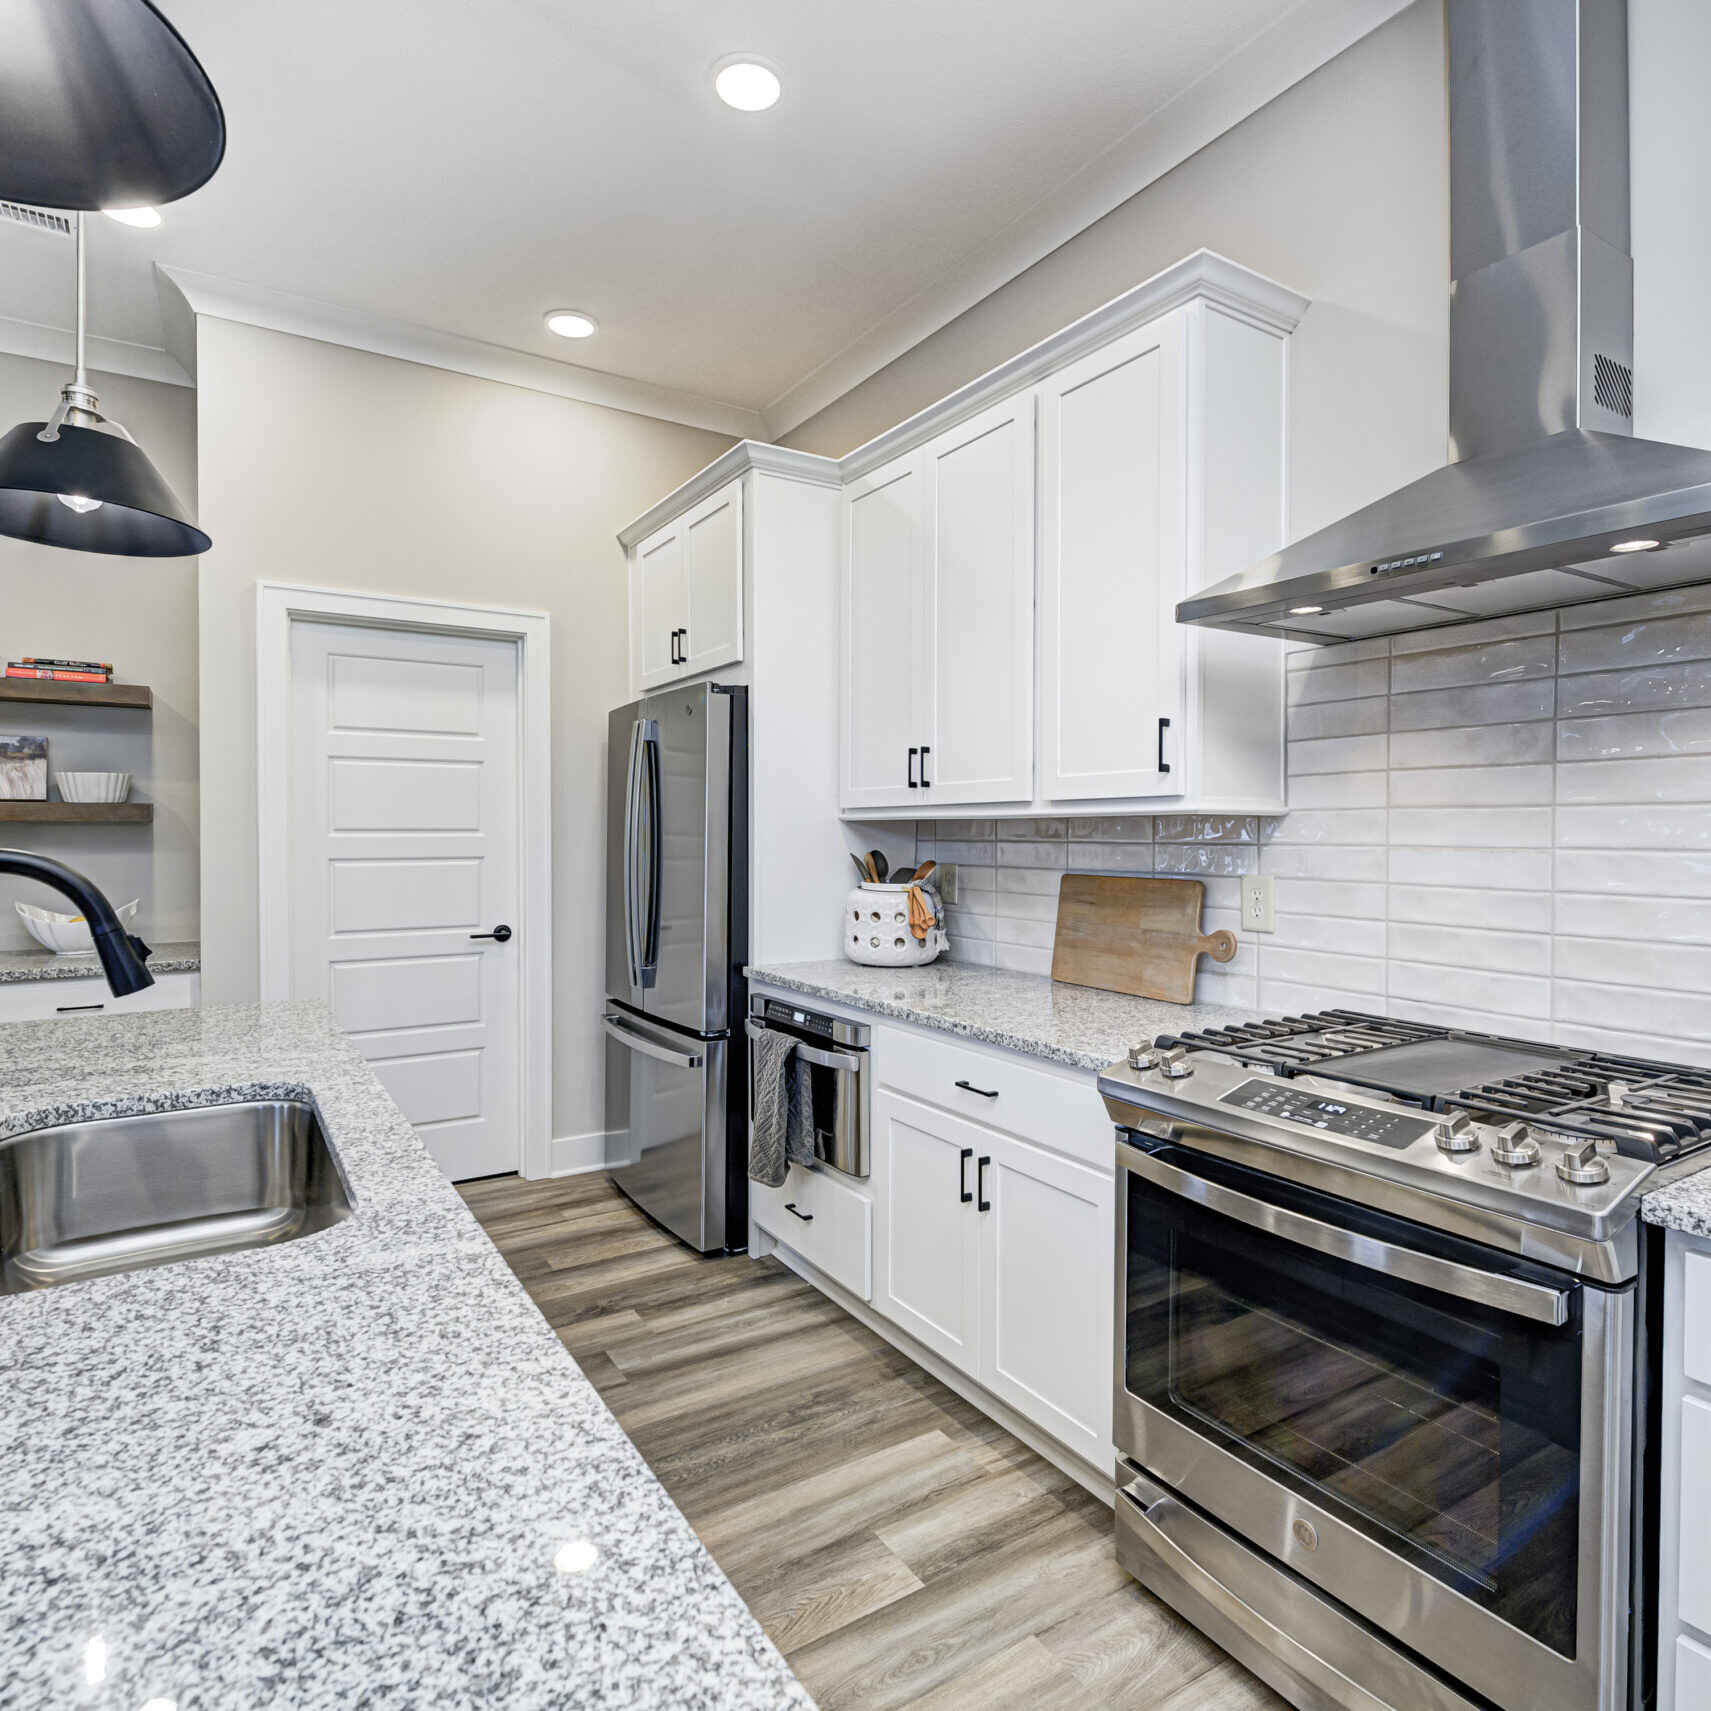 A white kitchen with stainless steel appliances and granite counter tops, designed by a Custom Home Builder in Carmel Indiana.